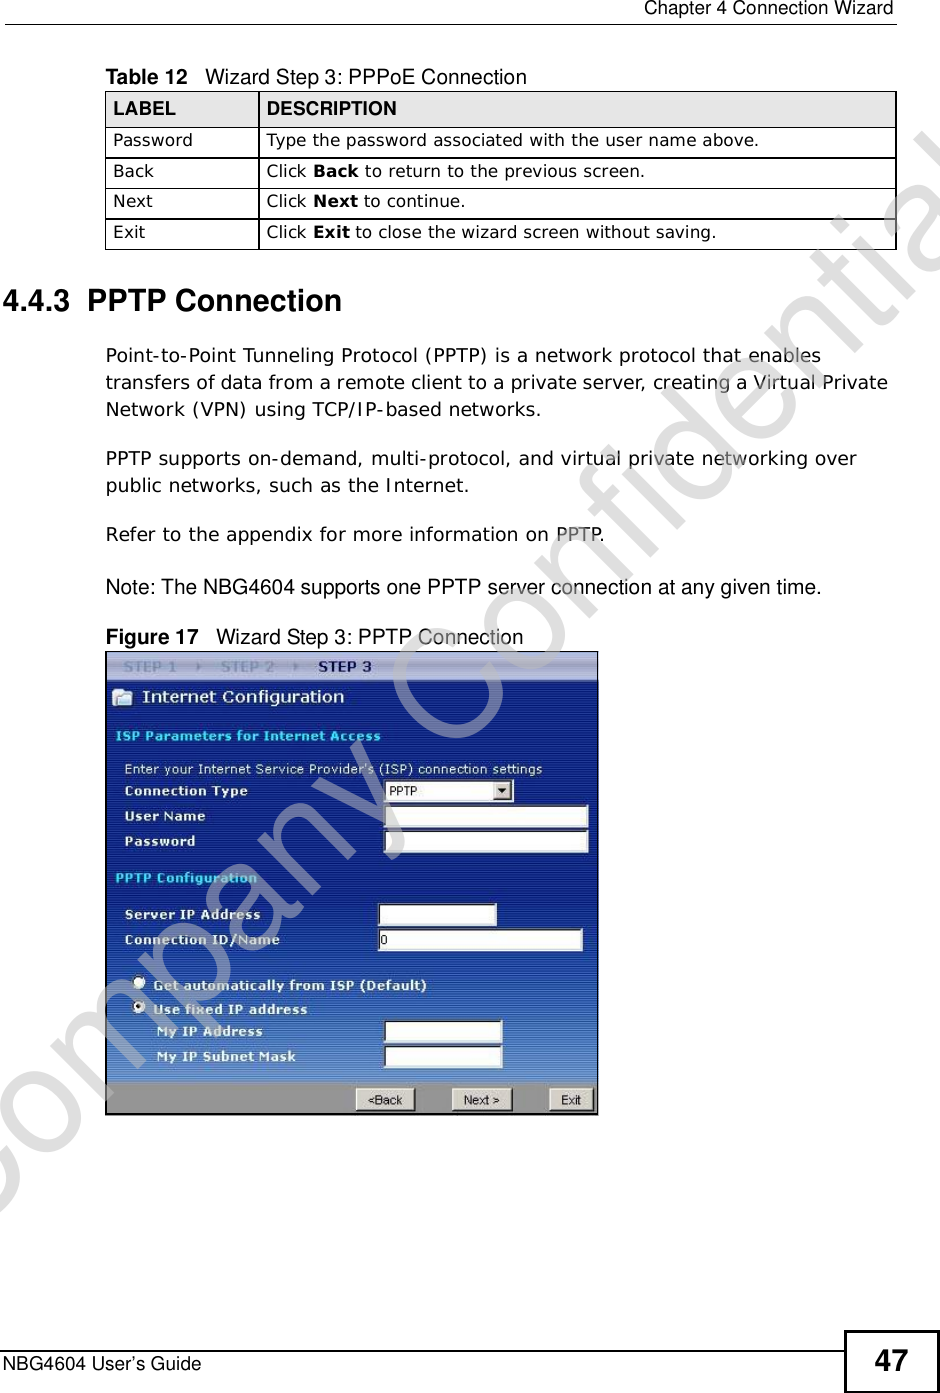  Chapter 4Connection WizardNBG4604 User’s Guide 474.4.3  PPTP ConnectionPoint-to-Point Tunneling Protocol (PPTP) is a network protocol that enables transfers of data from a remote client to a private server, creating a Virtual Private Network (VPN) using TCP/IP-based networks.PPTP supports on-demand, multi-protocol, and virtual private networking over public networks, such as the Internet.Refer to the appendix for more information on PPTP.Note: The NBG4604 supports one PPTP server connection at any given time.Figure 17   Wizard Step 3: PPTP ConnectionPassword  Type the password associated with the user name above.Back Click Back to return to the previous screen. Next Click Next to continue. Exit Click Exit to close the wizard screen without saving.Table 12   Wizard Step 3: PPPoE ConnectionLABEL DESCRIPTIONCompany Confidential